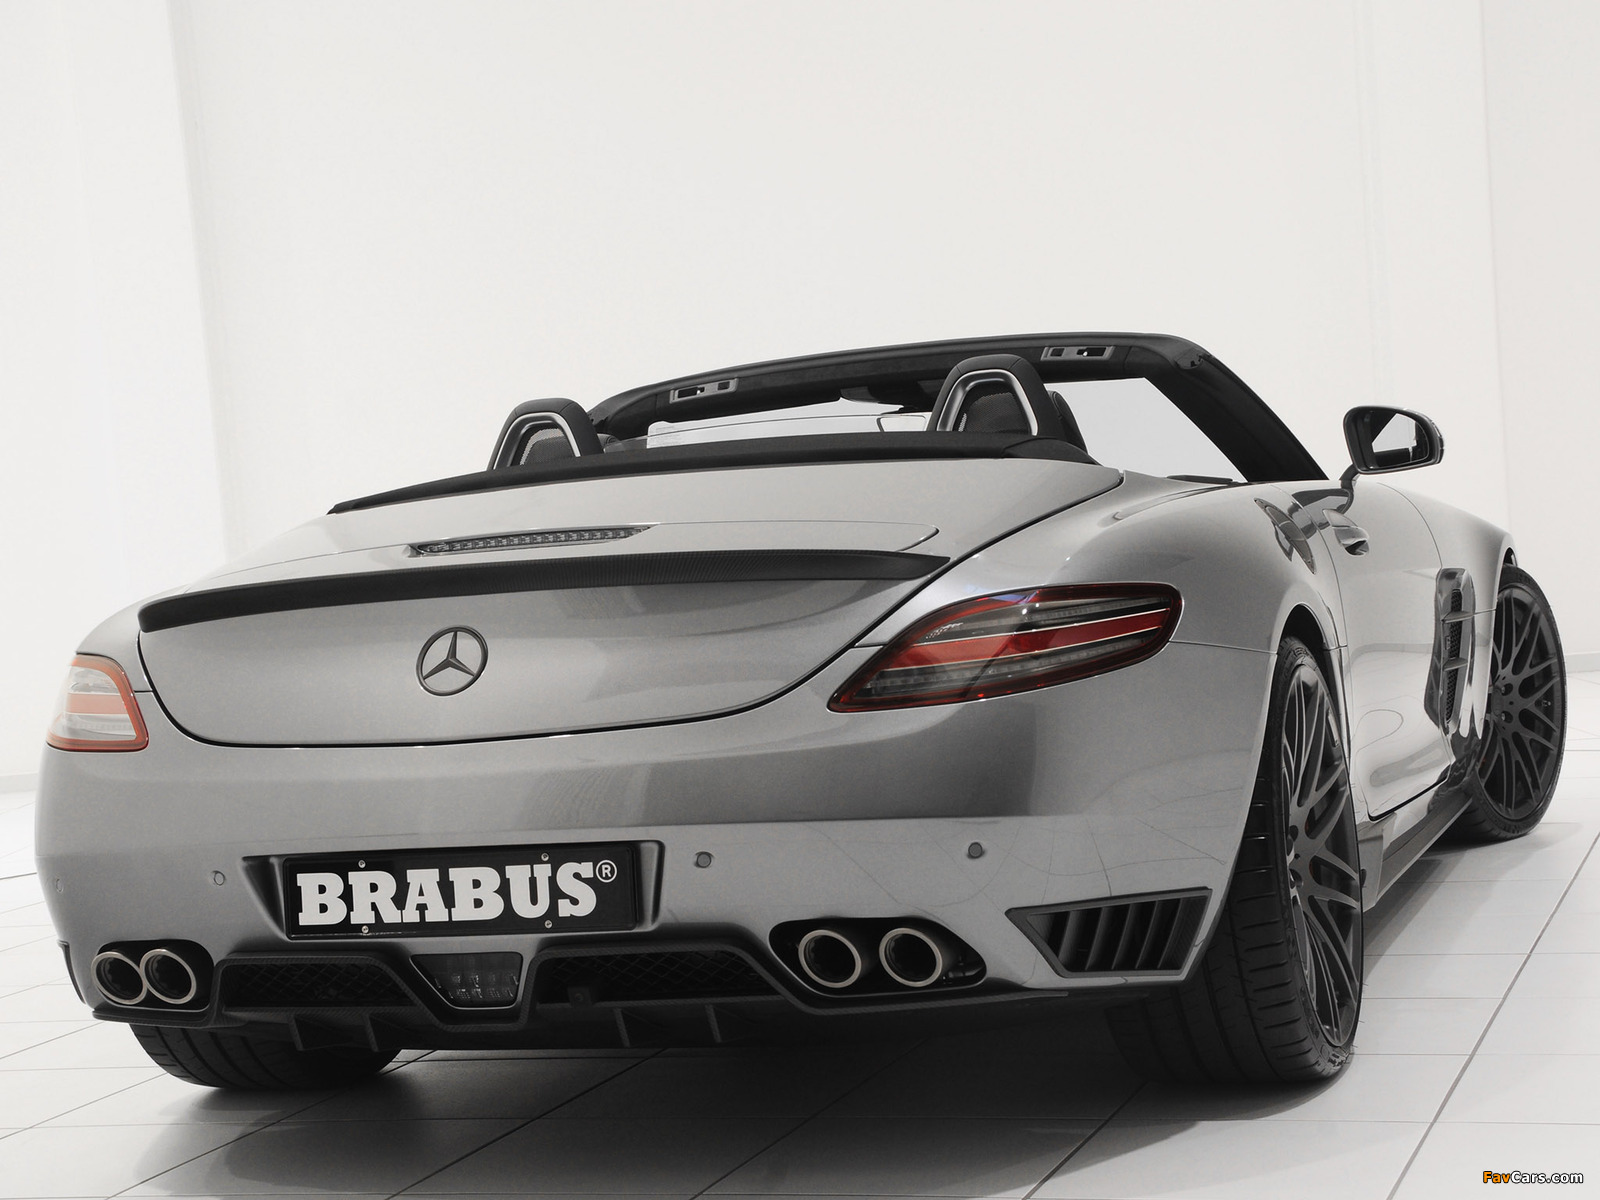 Brabus Mercedes-Benz SLS 63 AMG Roadster (R197) 2011 pictures (1600 x 1200)